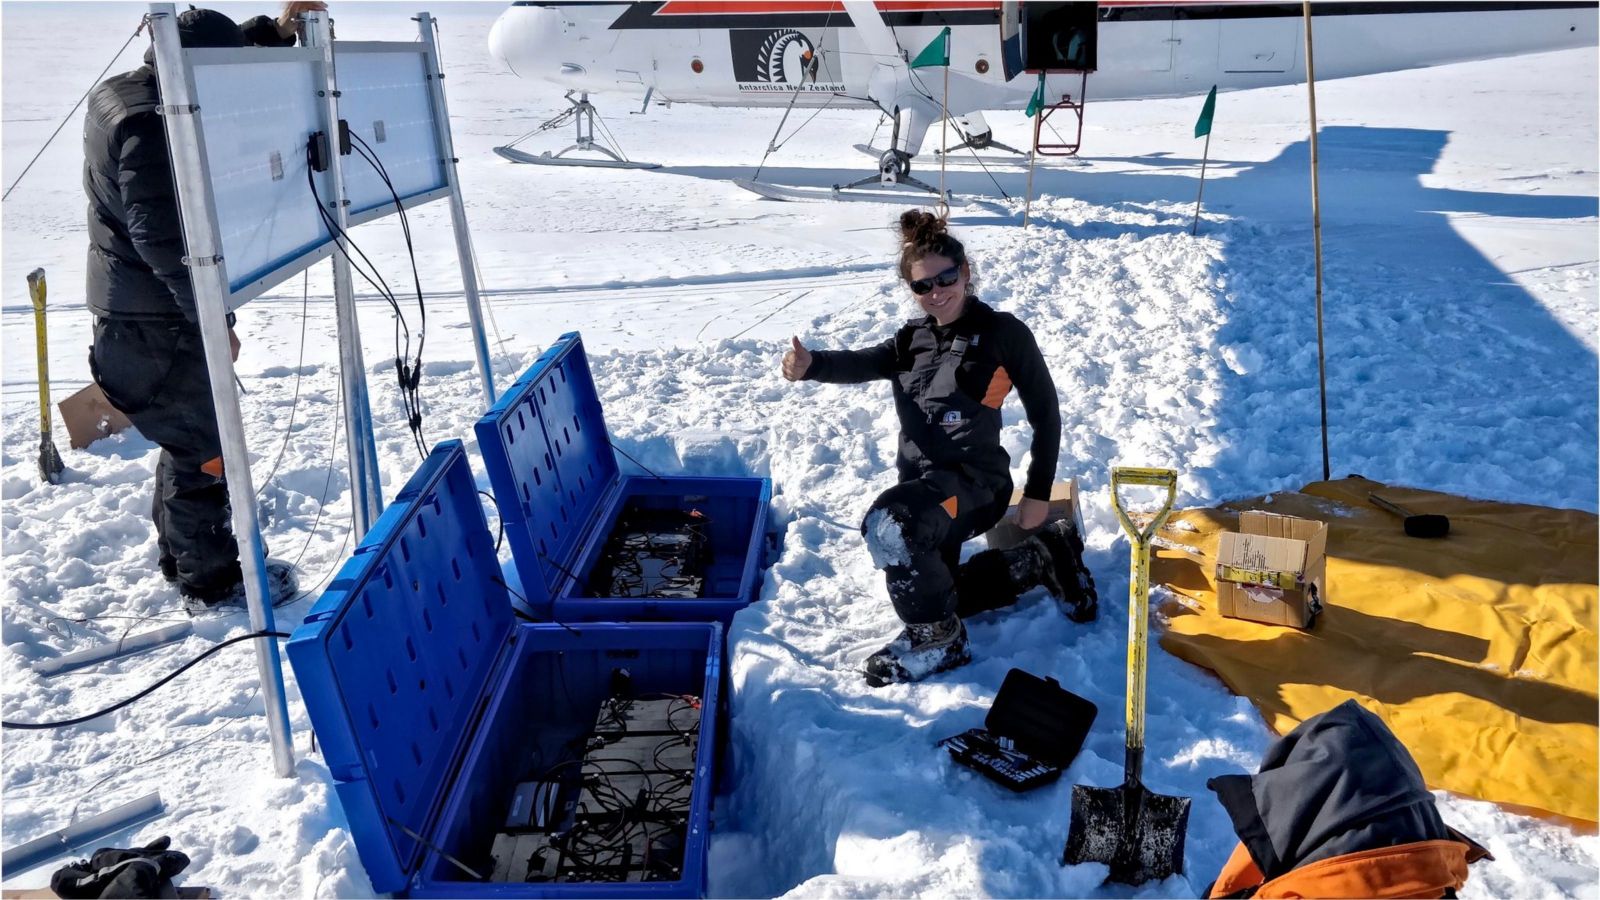 Girl doing thumbs-up on ice with science equipment around her and a plane in the background, in antarctica